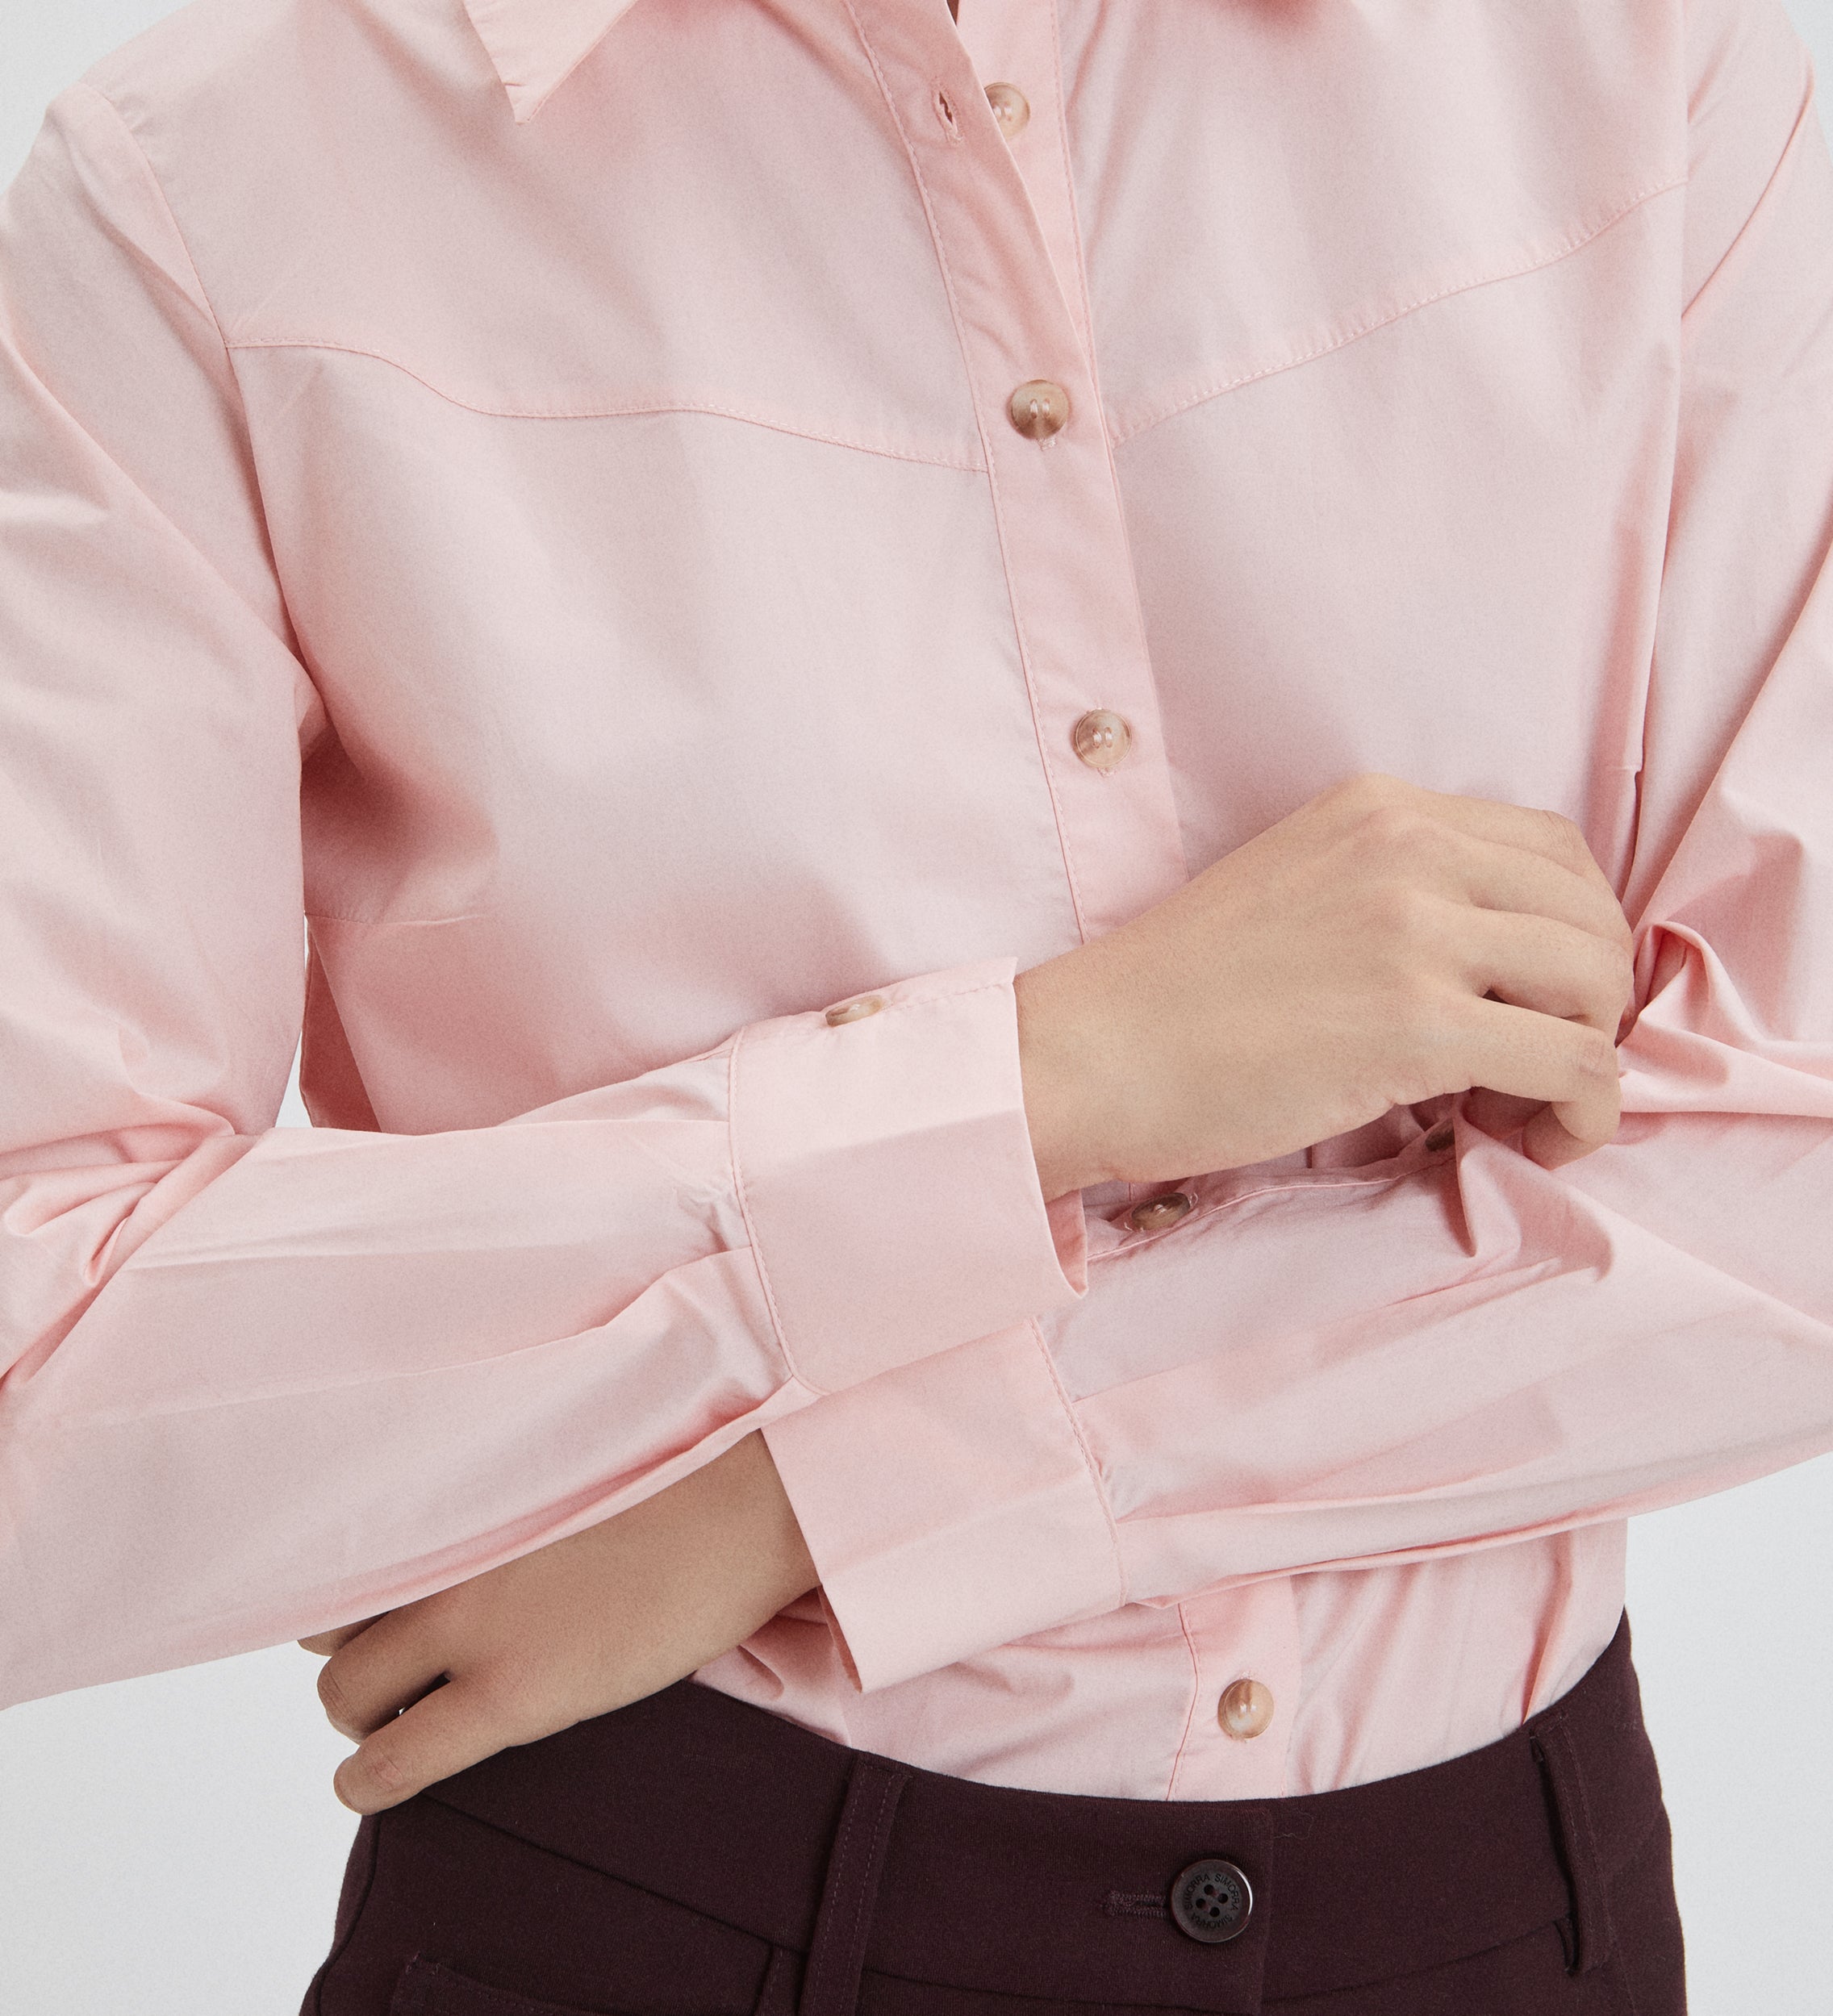 Shirt with flap pockets